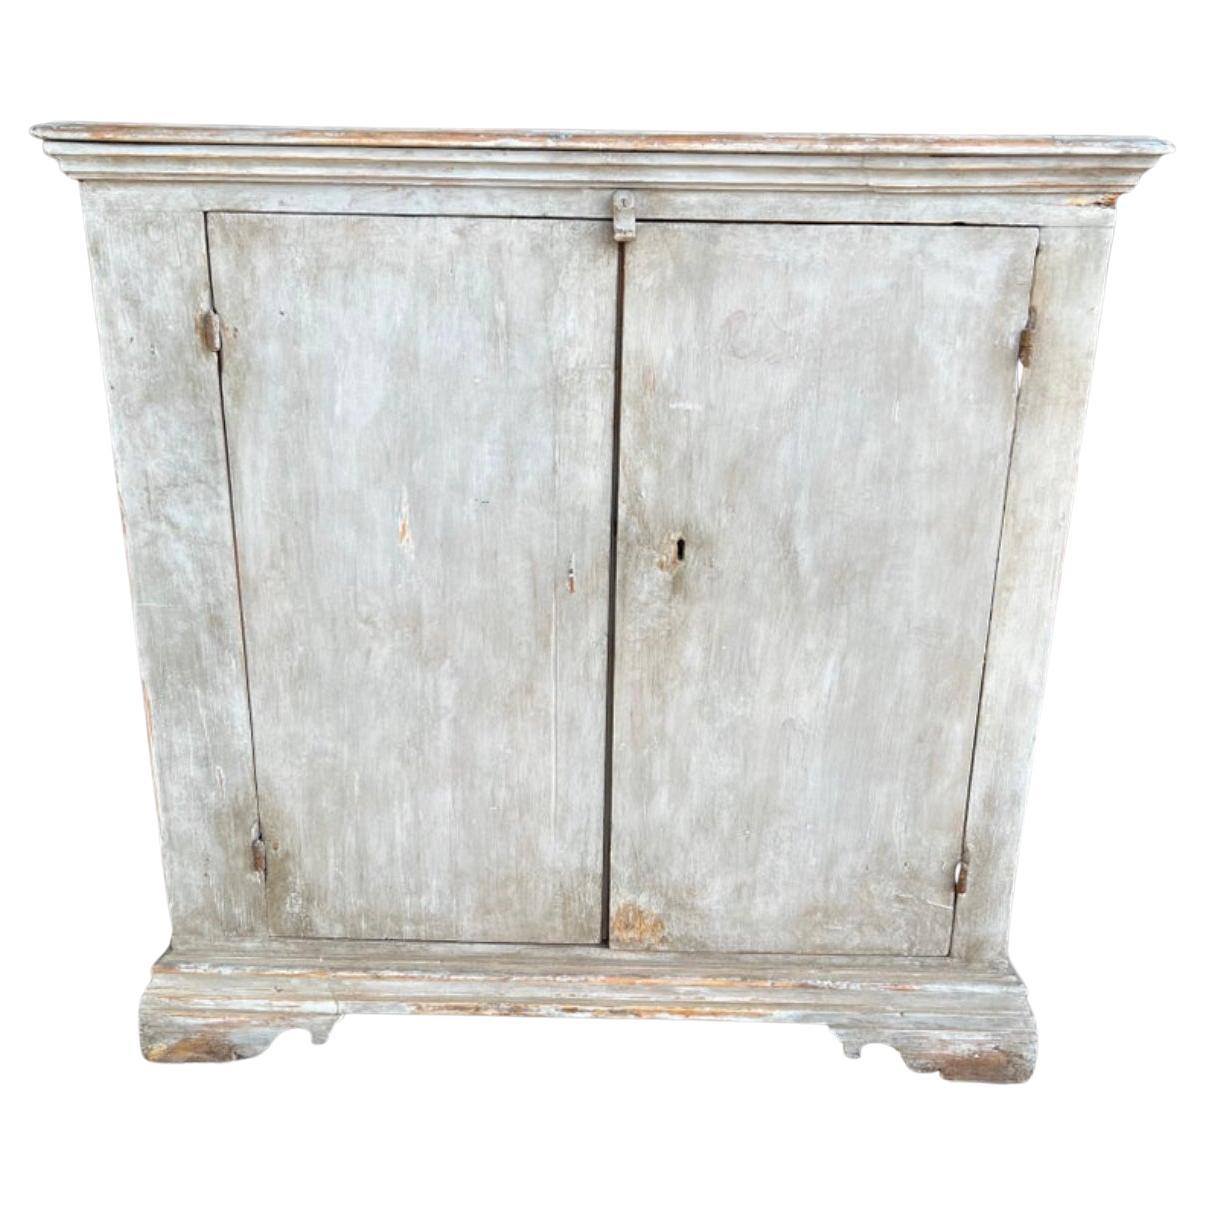 A beautiful blue toned painted Italian cabinet that features two doors. This piece is perfect for any design space, use in an entry way with a mirror or painting above it and decorative objects atop, use in a laundry room to store odds and ends, use